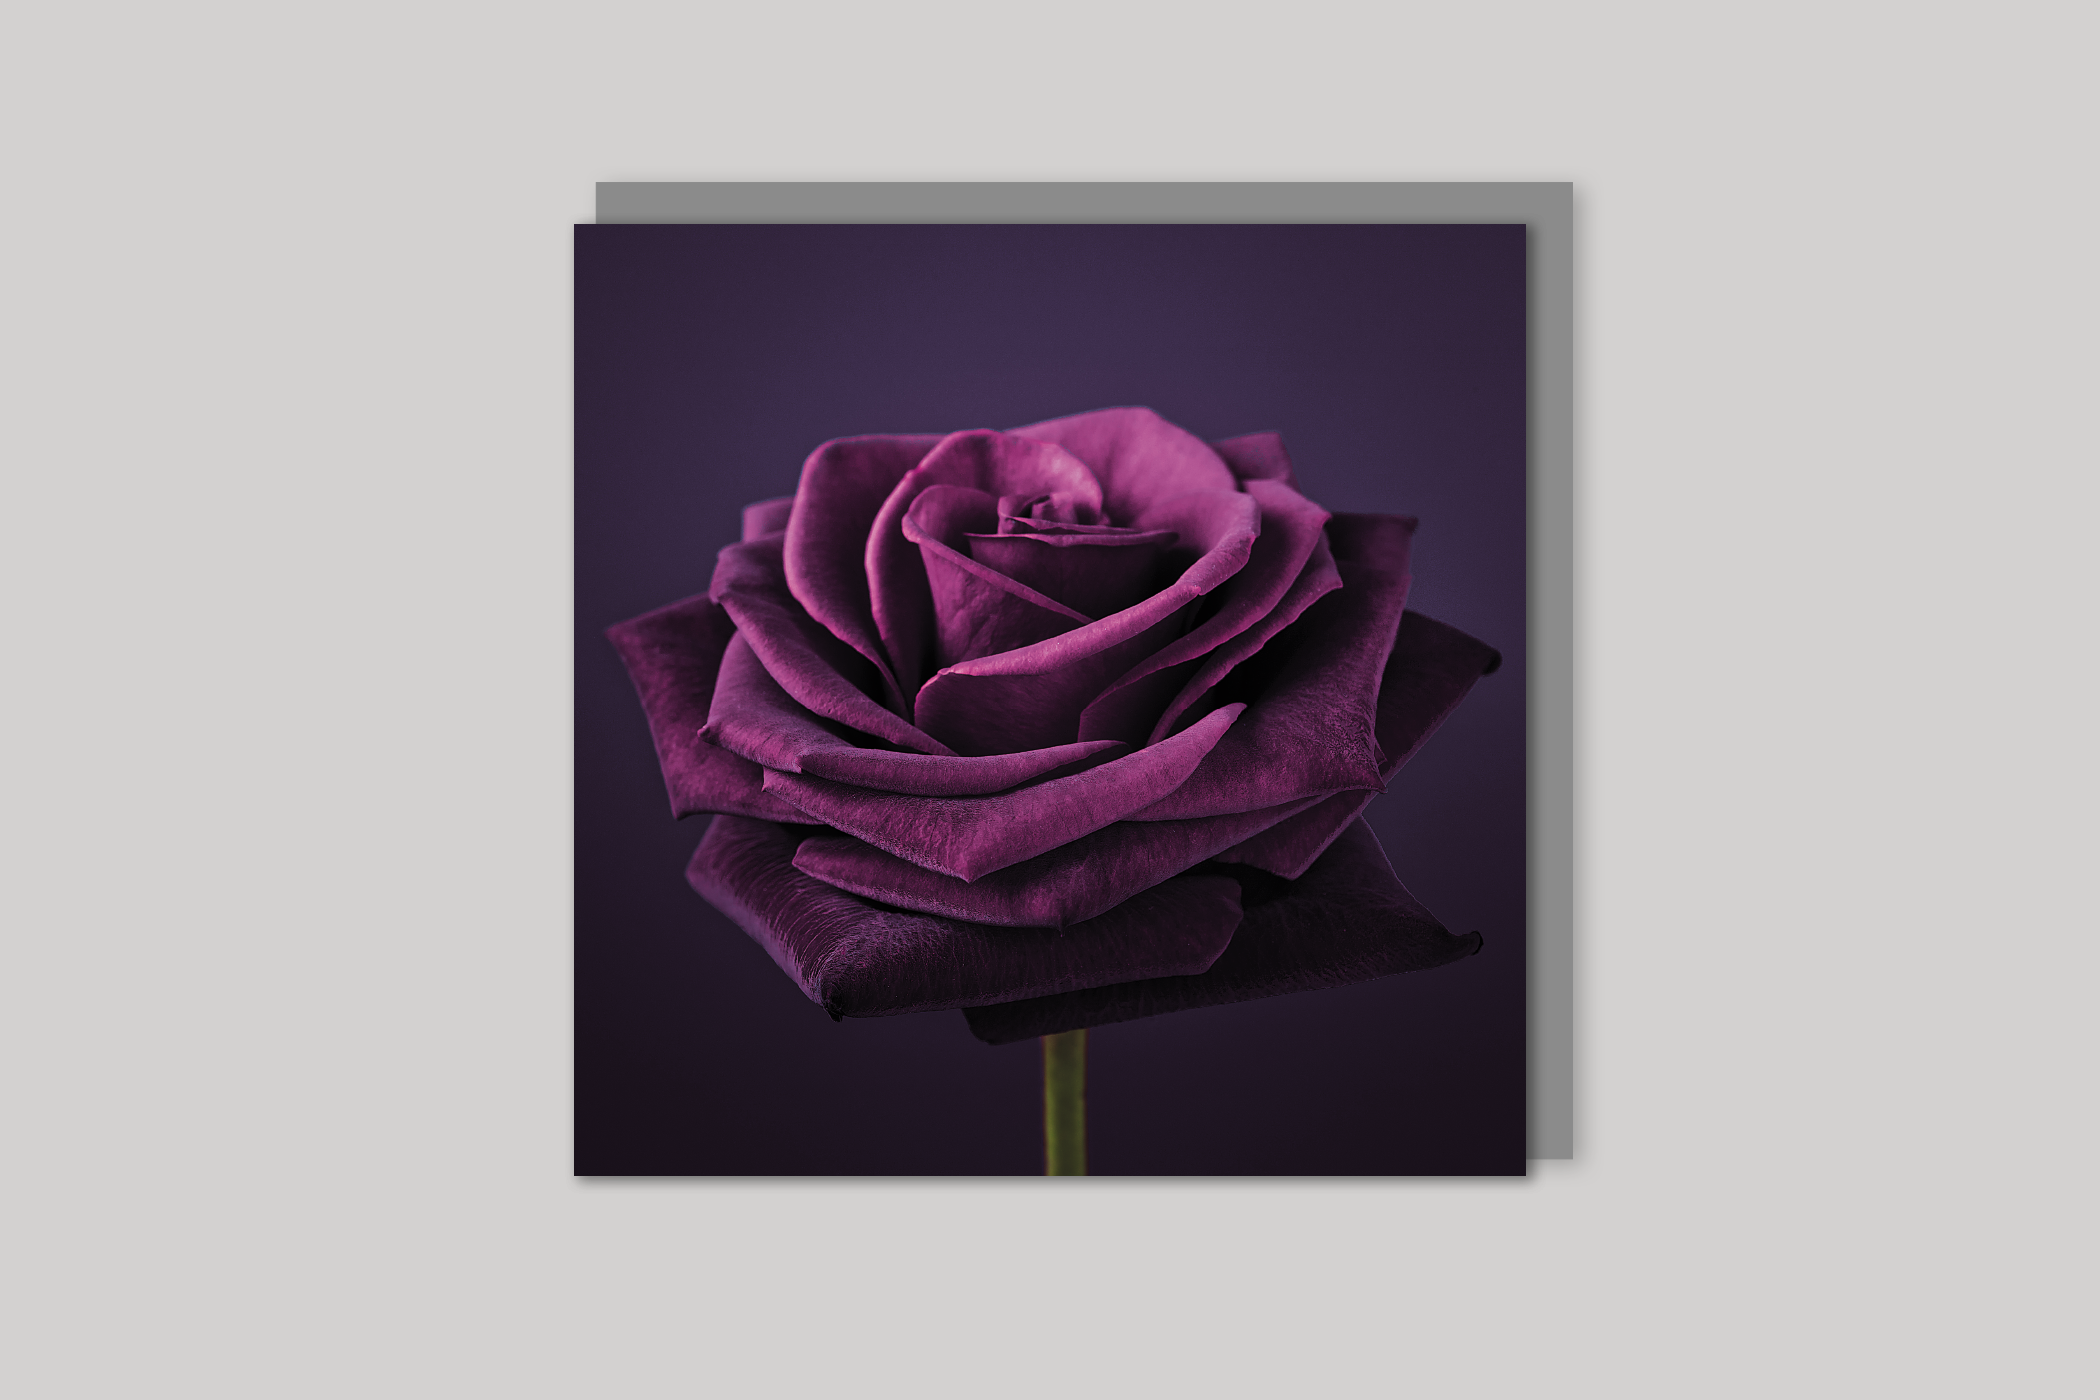 Velvet from Bloom range of floral photographic cards by Icon, back page.